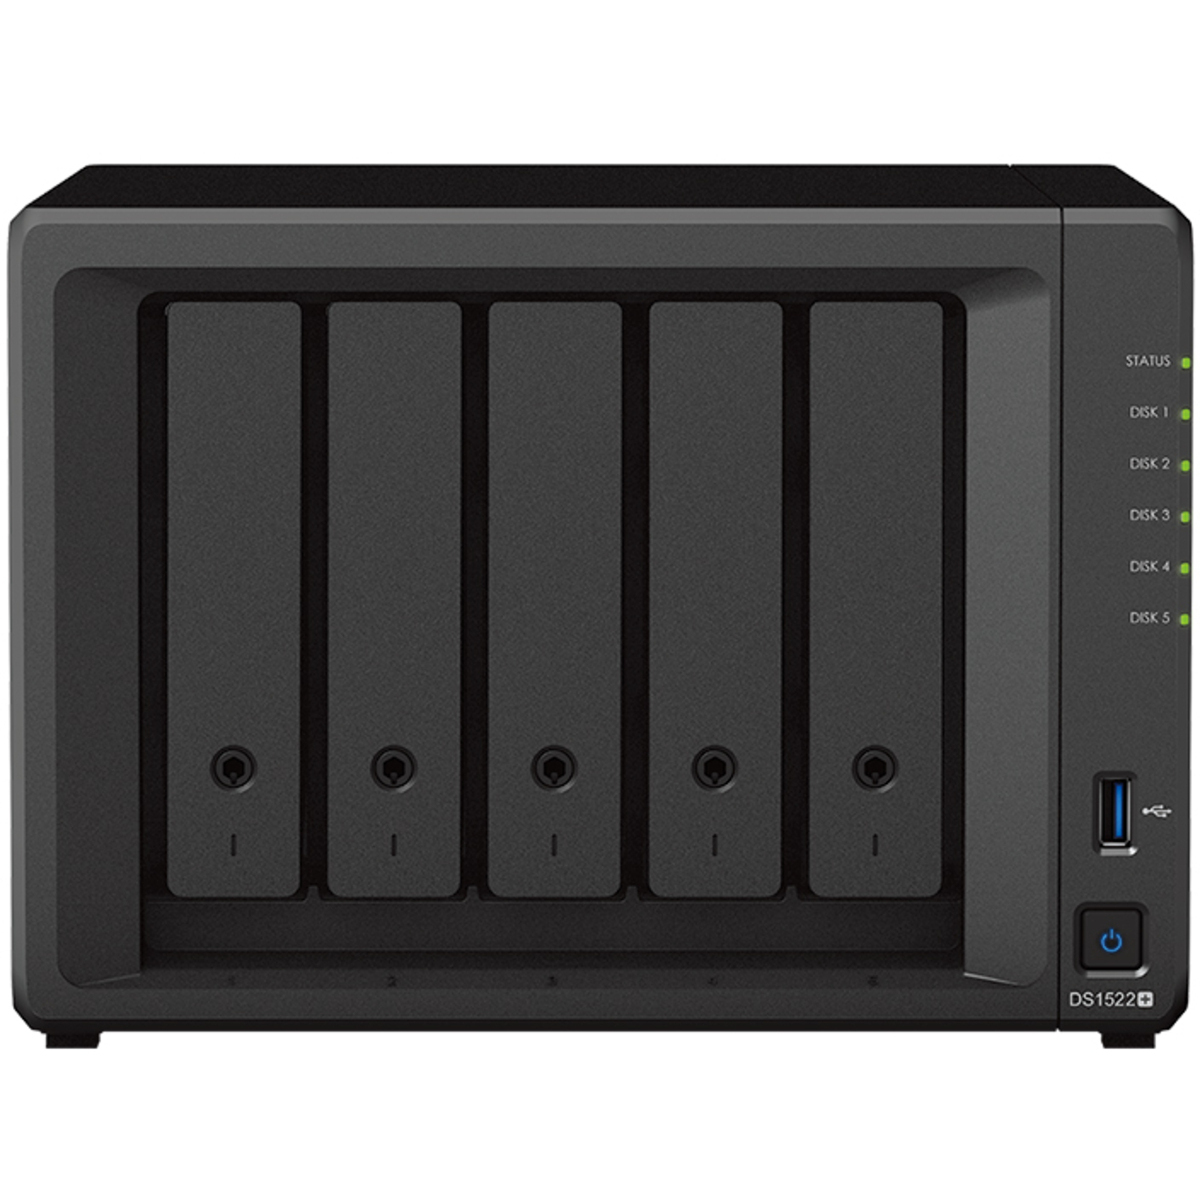 Synology DiskStation DS1522+ 18tb 5-Bay Desktop Multimedia / Power User / Business NAS - Network Attached Storage Device 3x6tb Seagate BarraCuda ST6000DM003 3.5 5400rpm SATA 6Gb/s HDD CONSUMER Class Drives Installed - Burn-In Tested - ON SALE DiskStation DS1522+